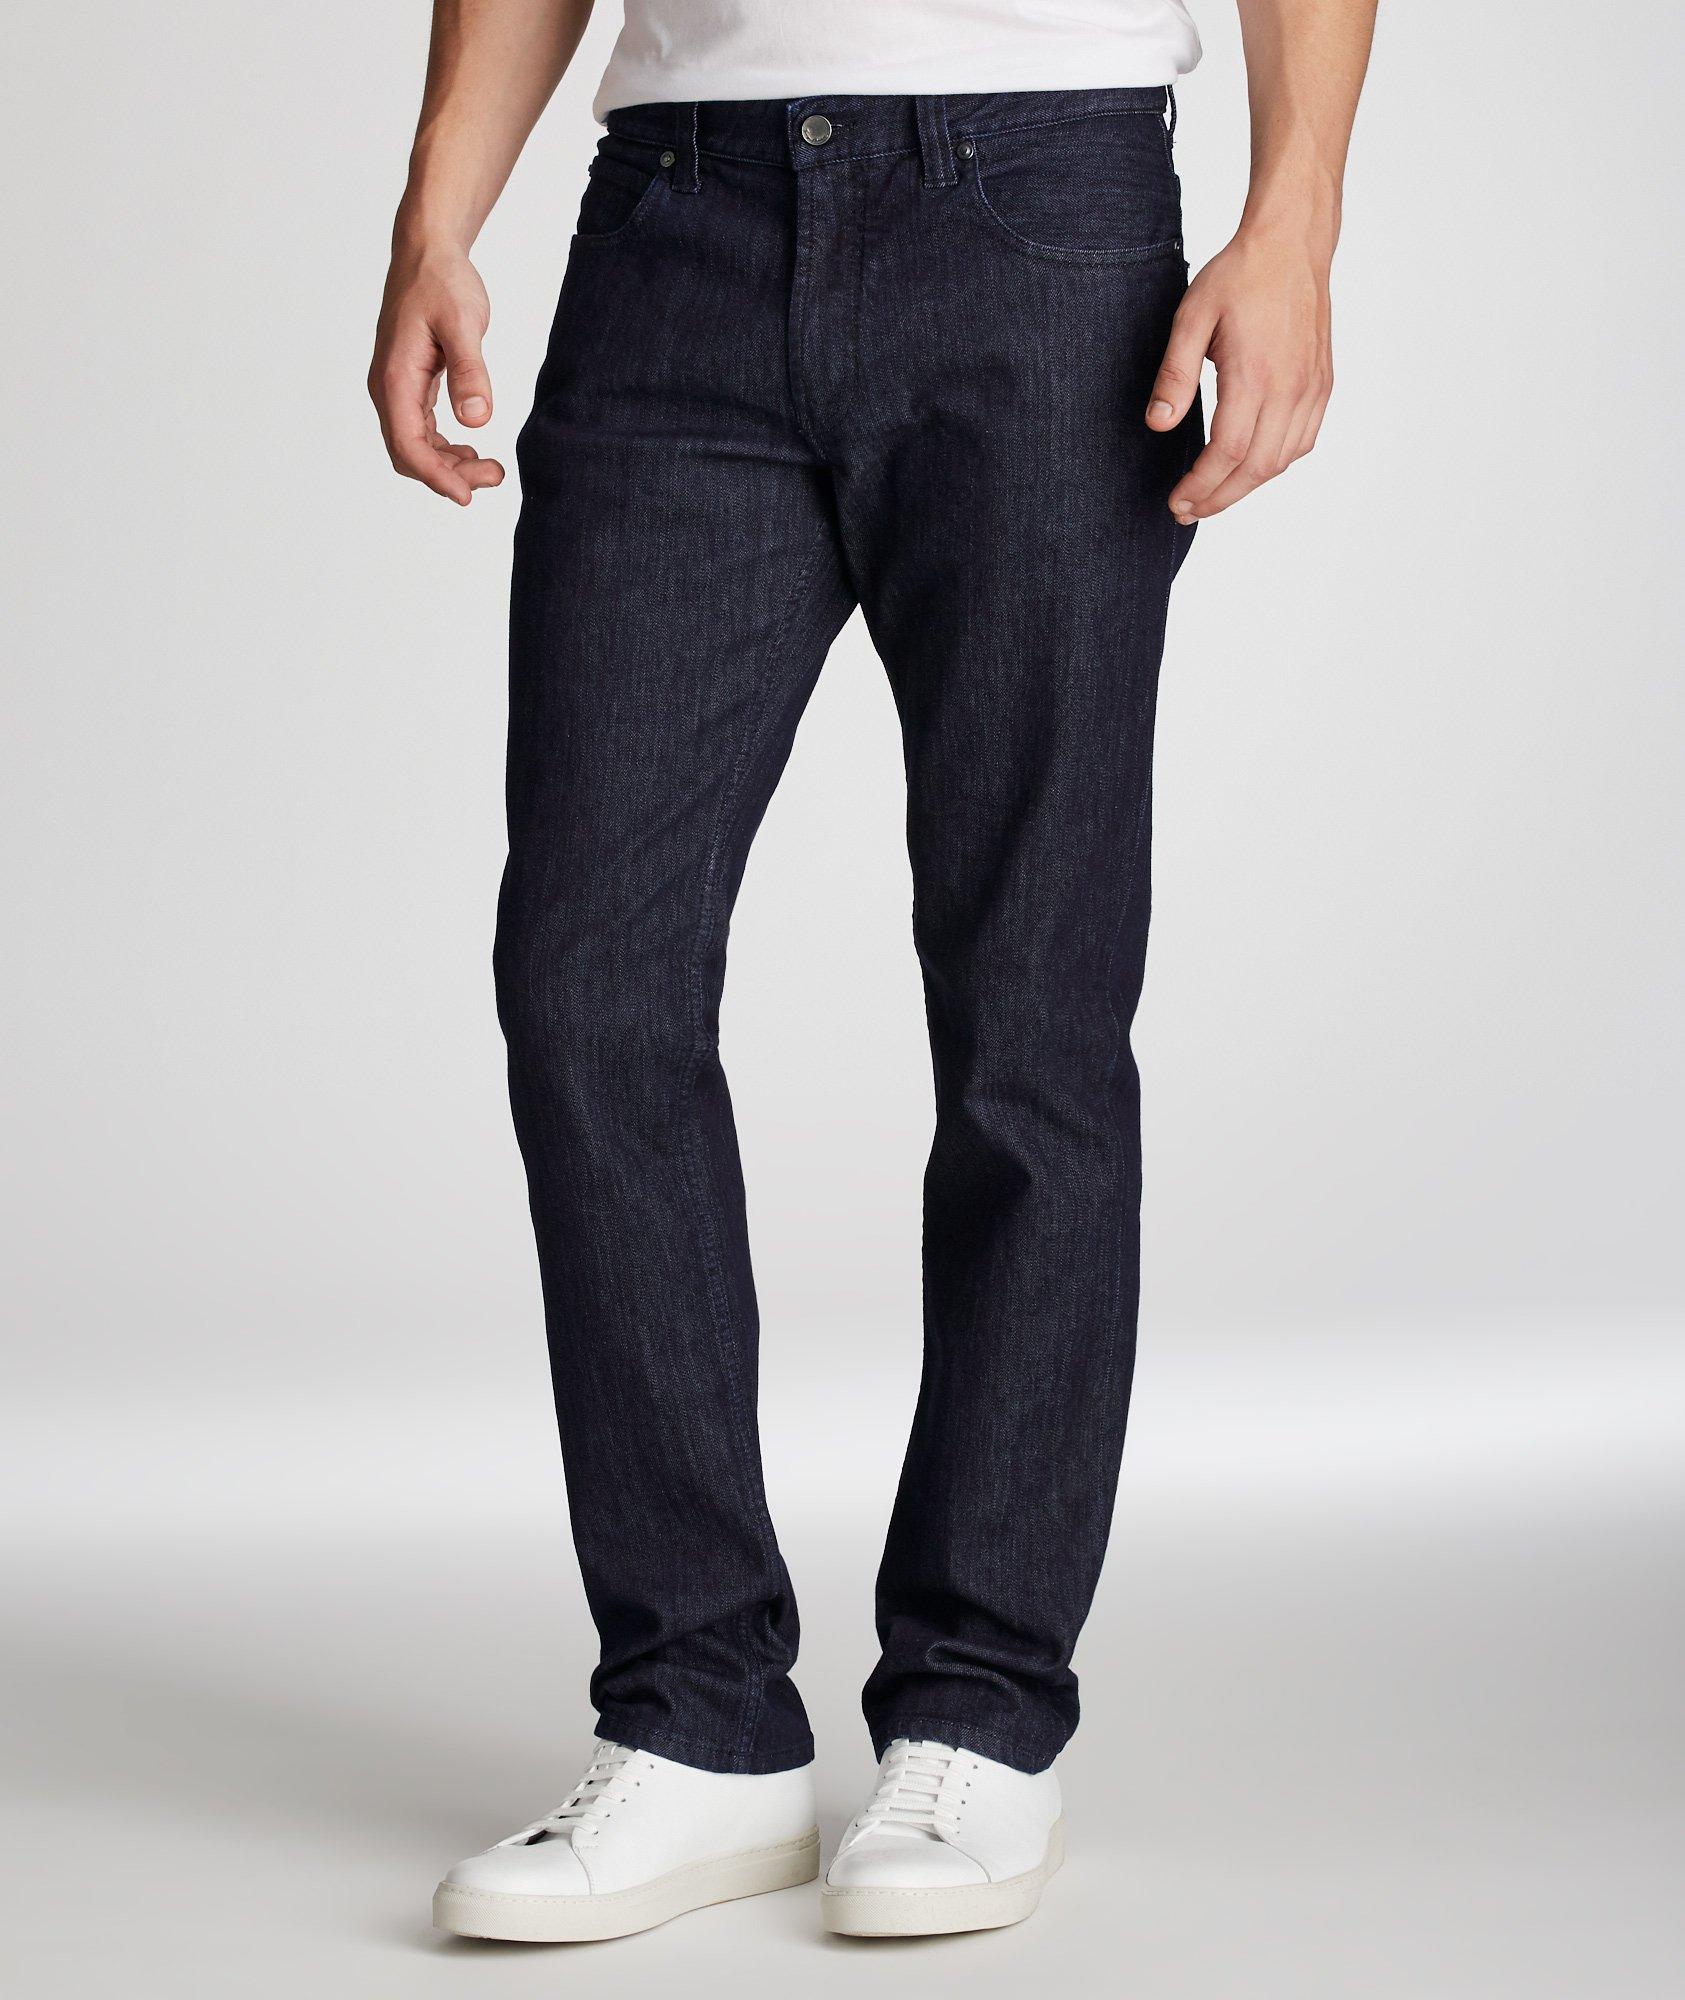 Straight Fit Jeans image 0